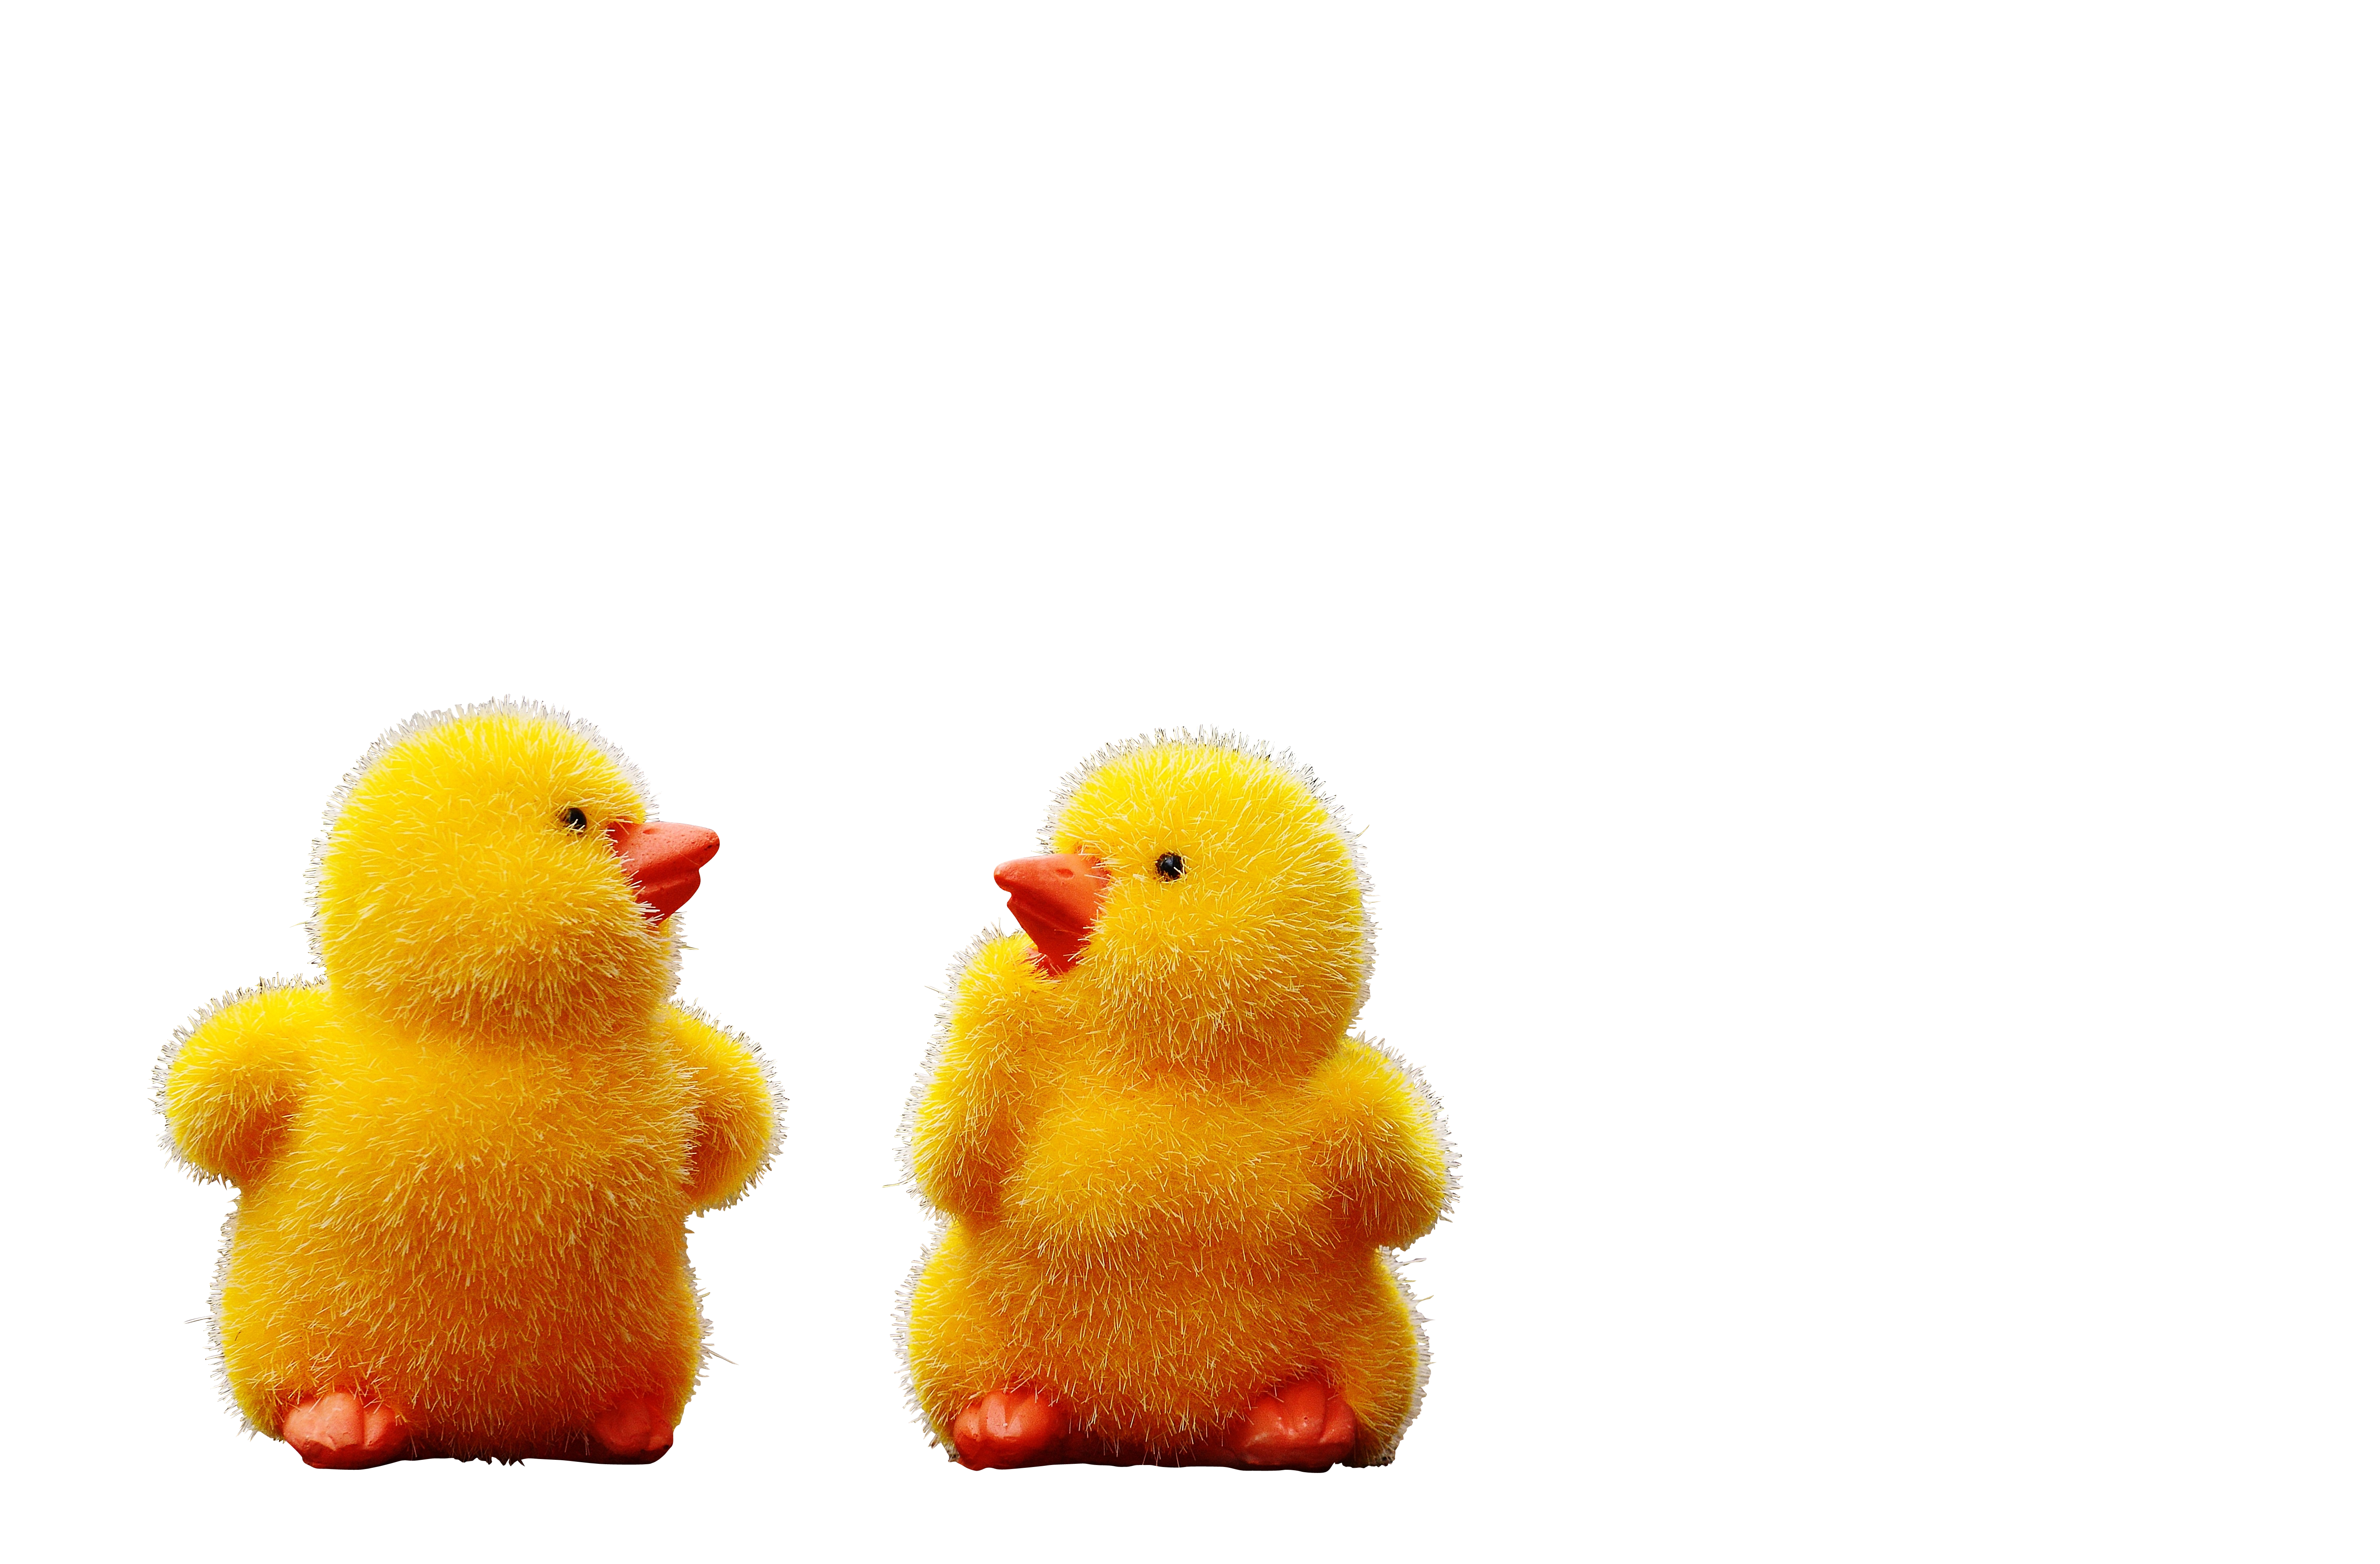 Two Yellow Toy Chickens On A Black Background